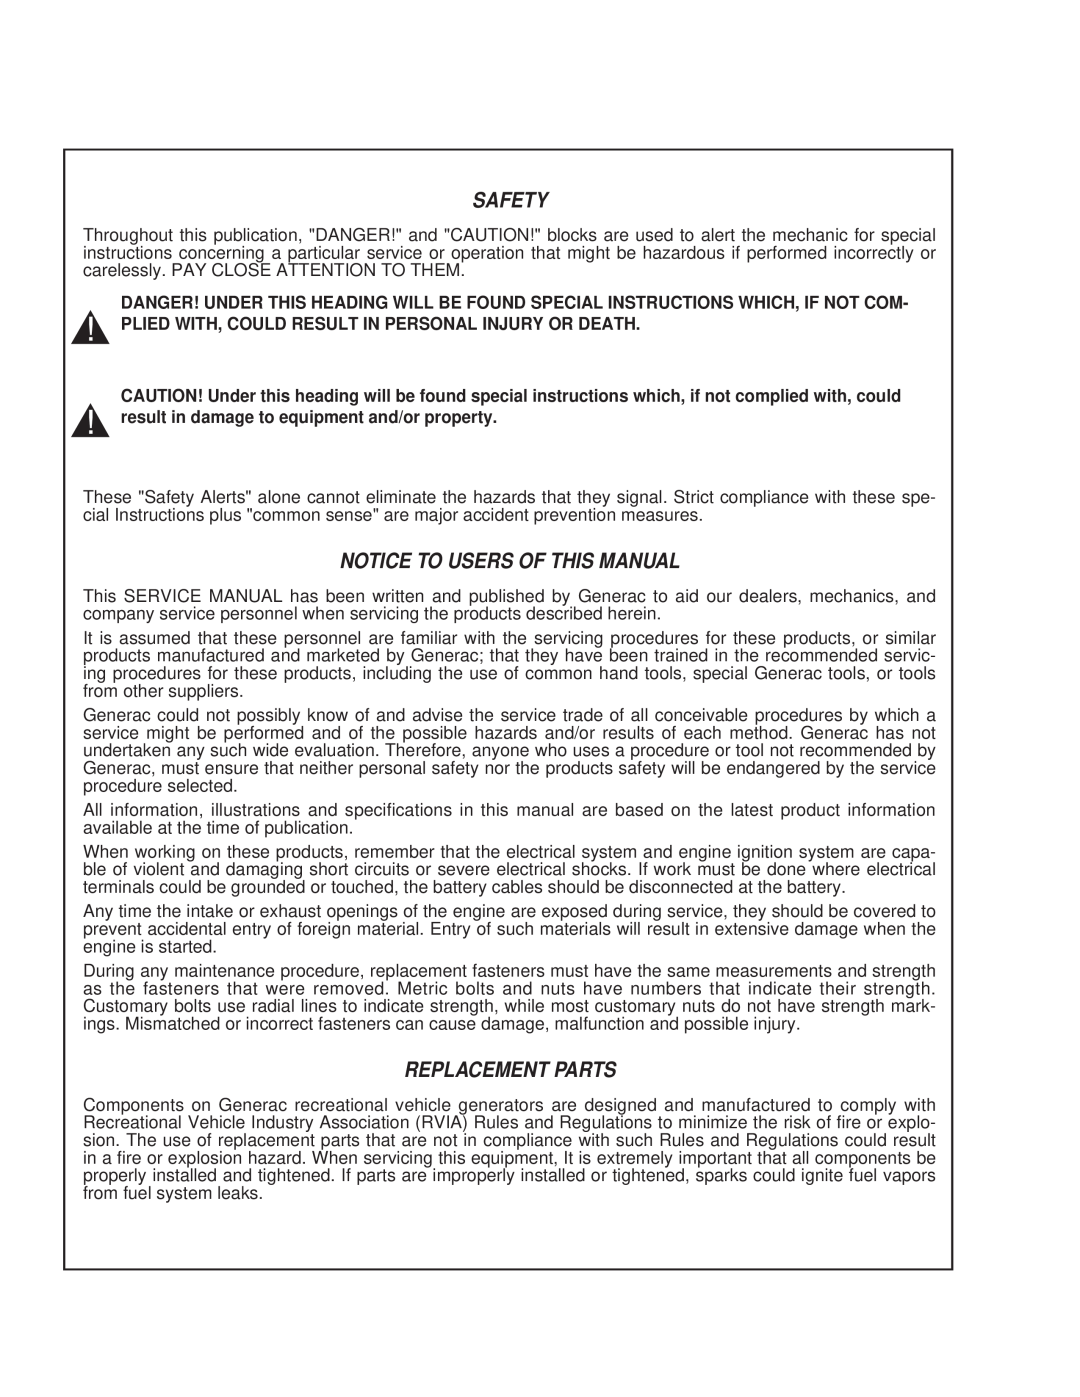 Guardian Technologies 4270 manual Safety, Notice To Users Of This Manual, Replacement Parts 